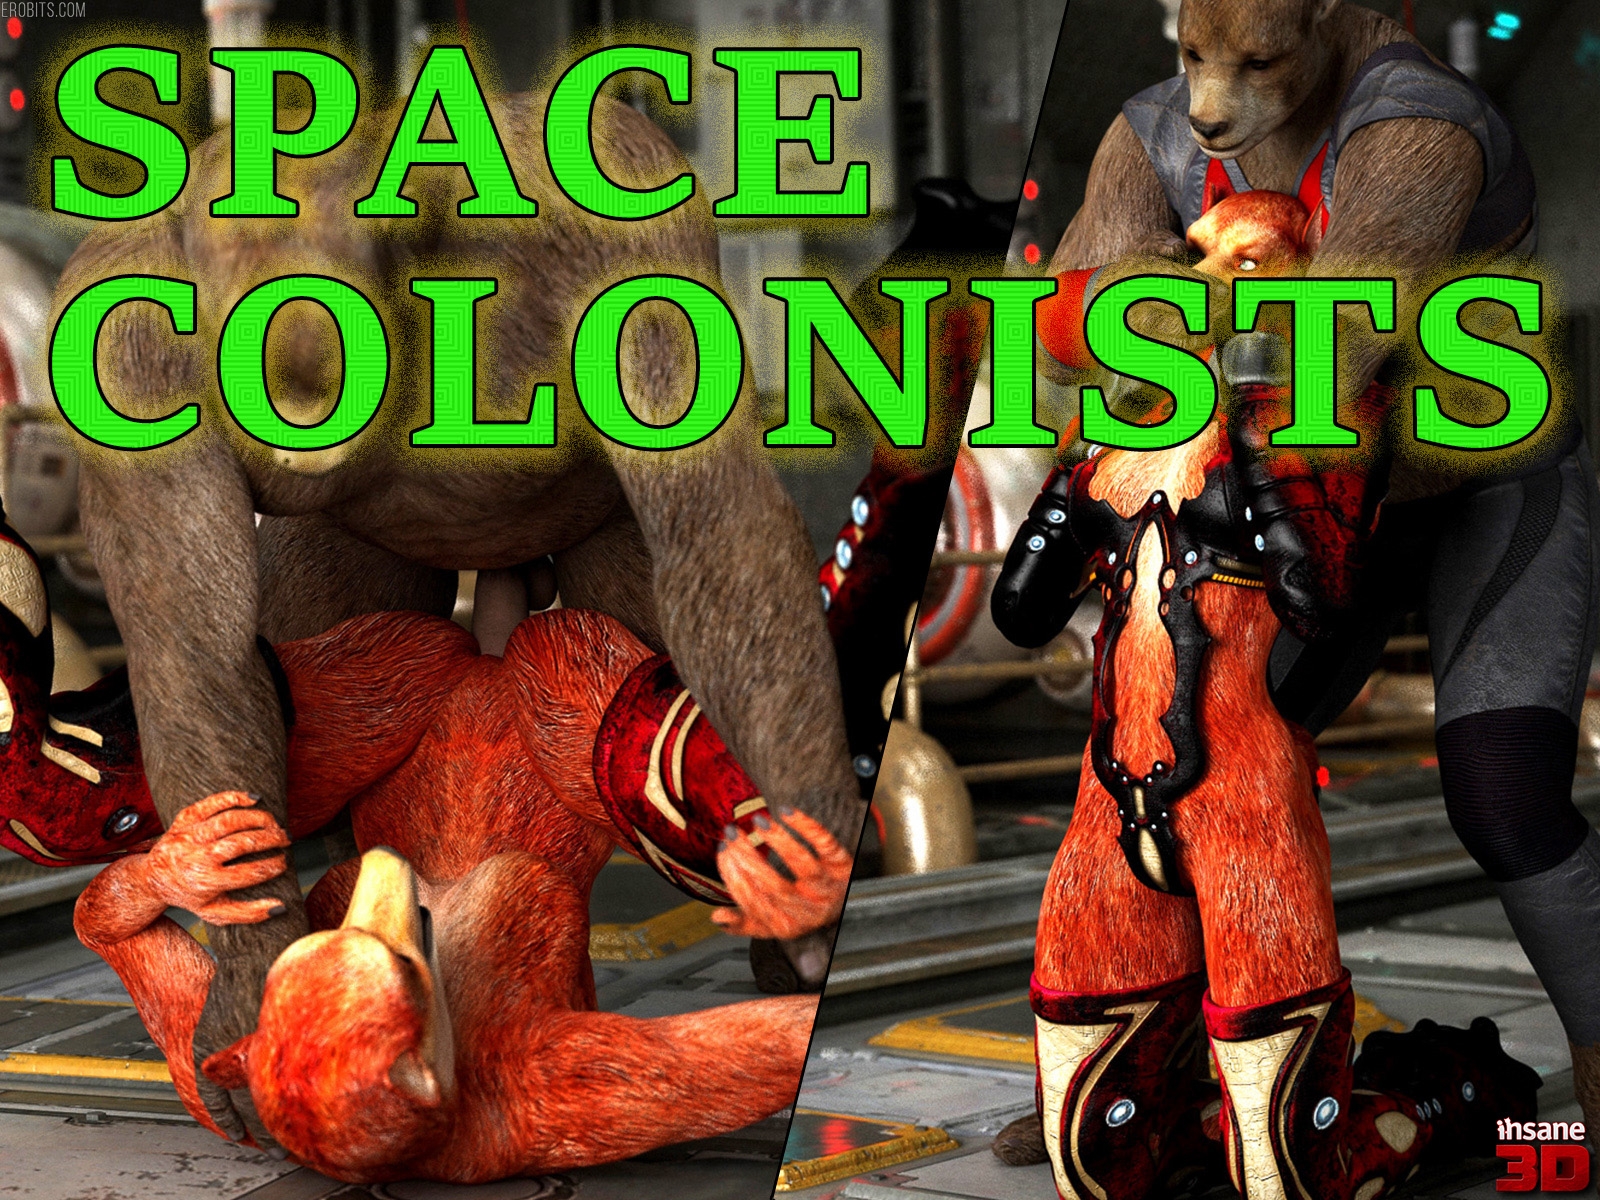 Space Colonists 👉 https://erobits.com/sci-fi/space-colonists.html 👈